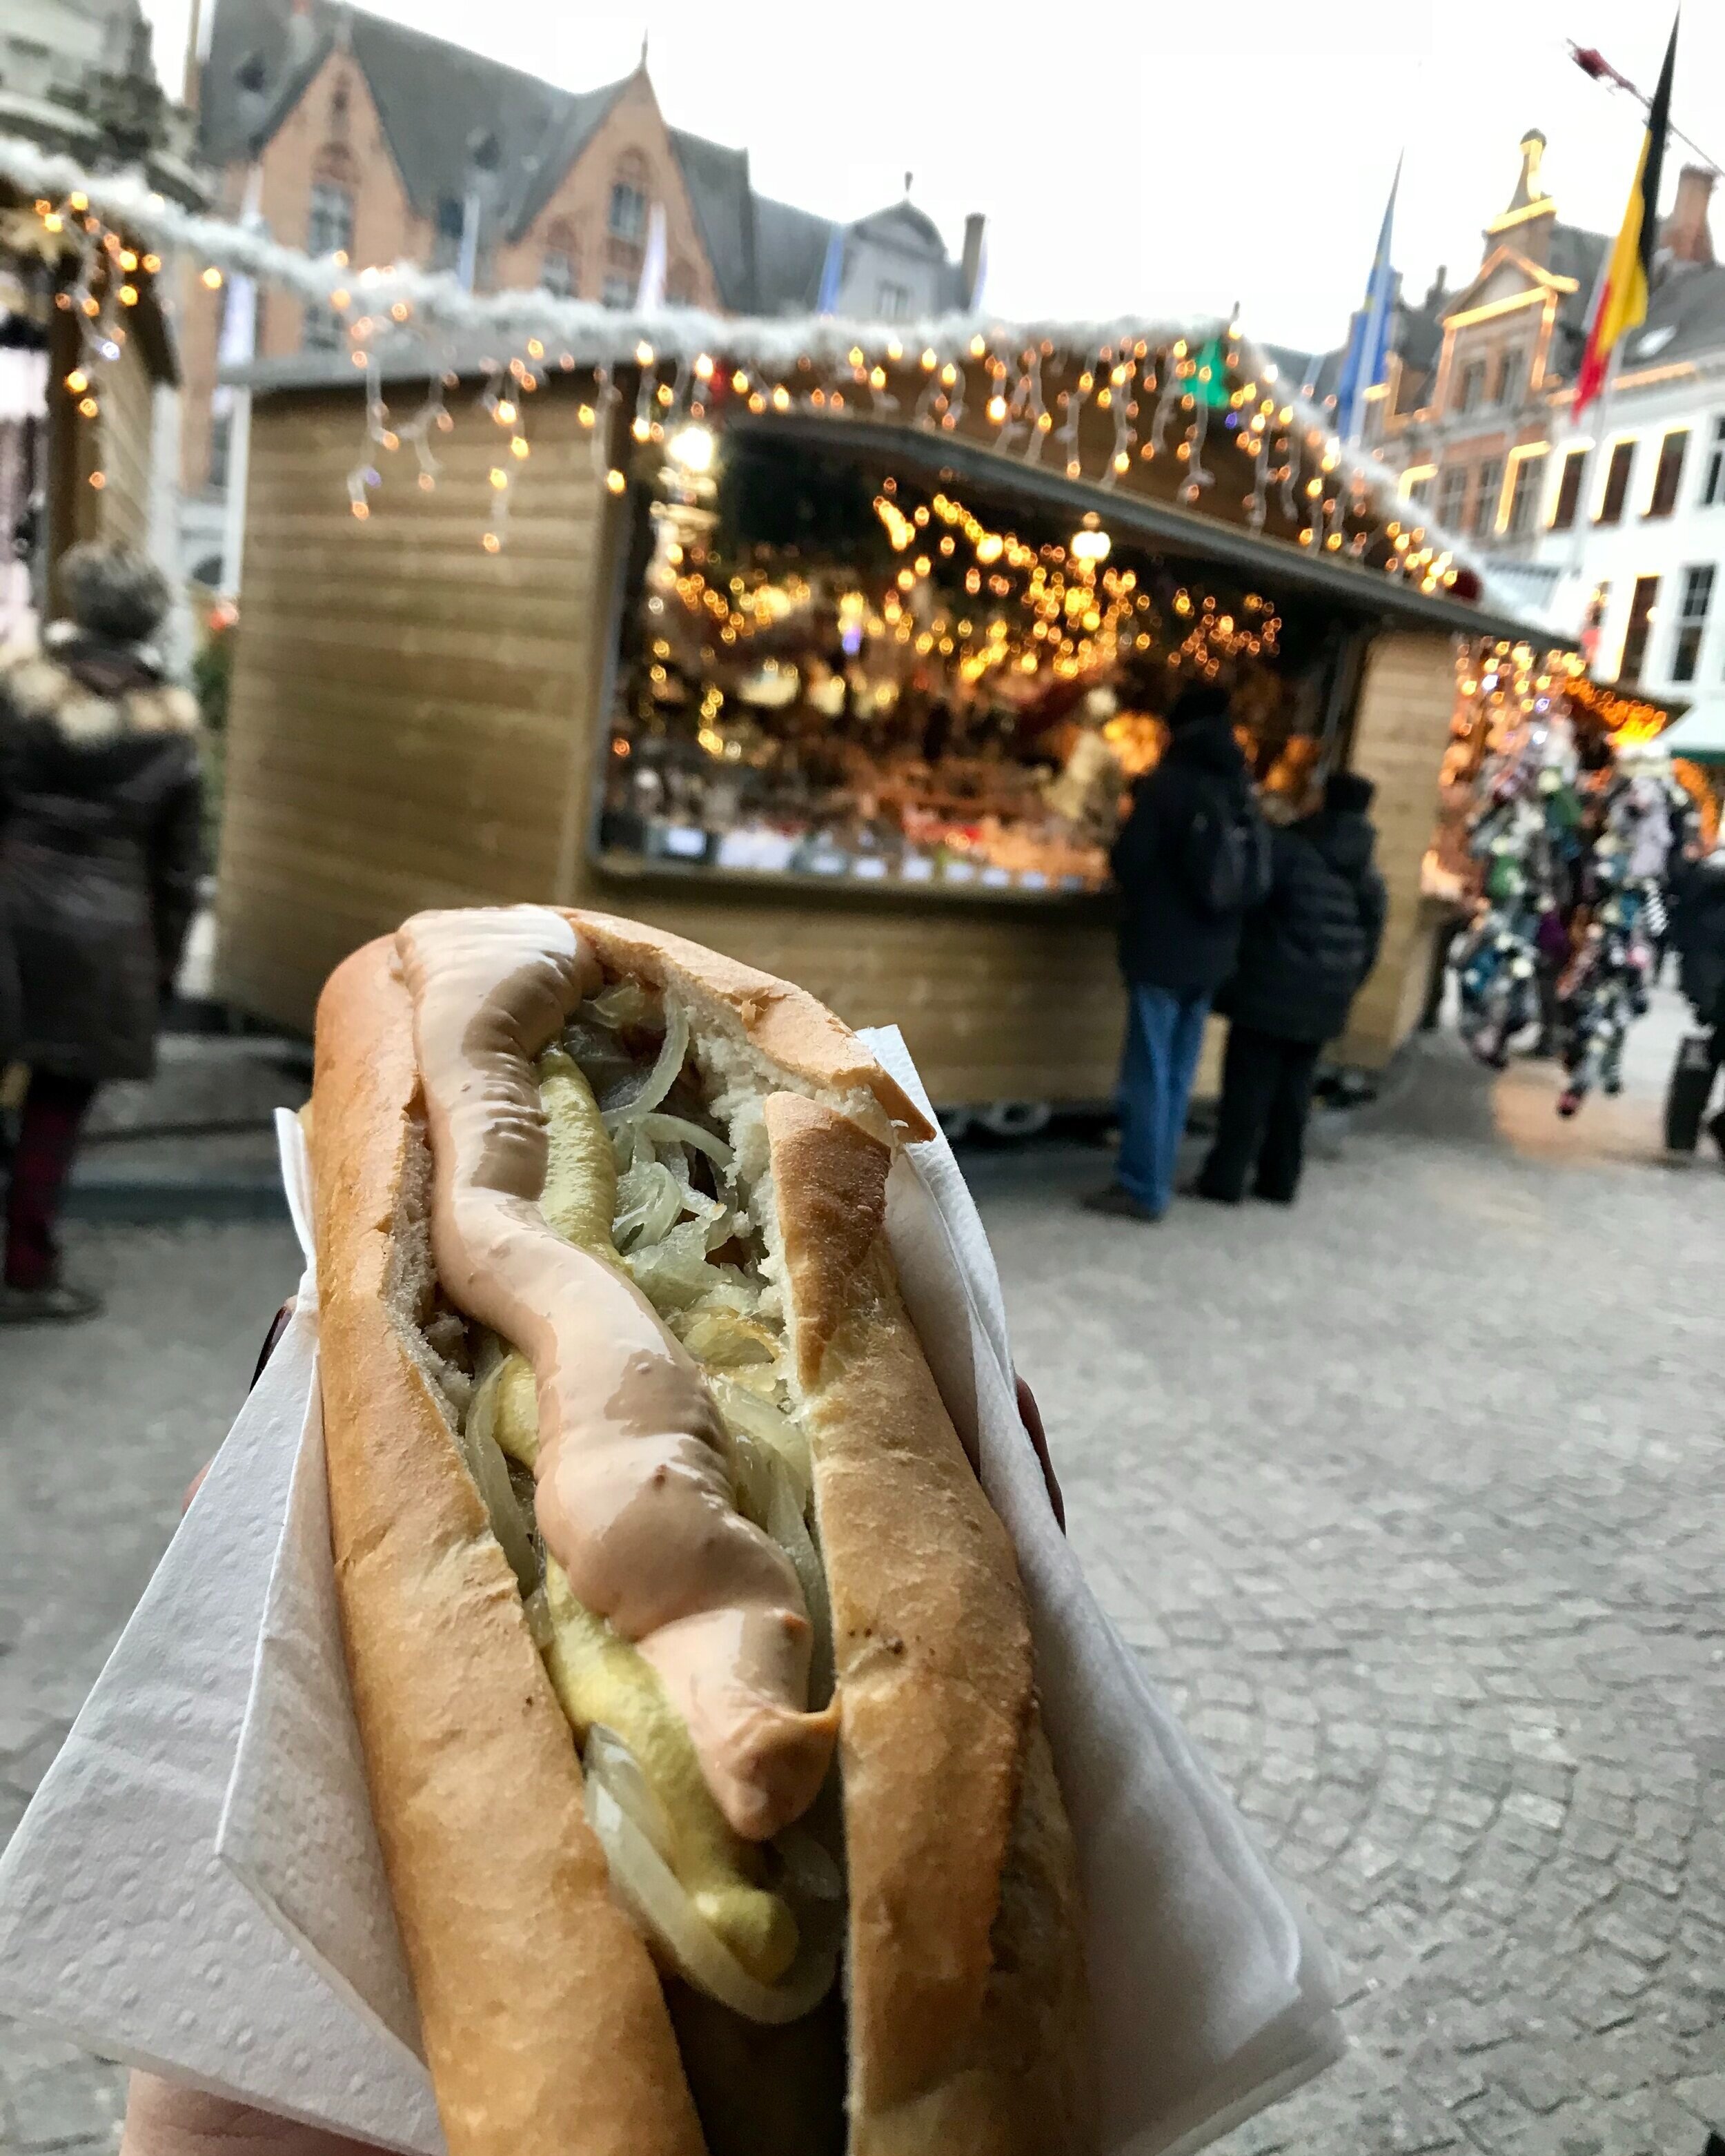 The best Bratwurst come from a Christmas Market in Belgium. Prove me wrong!